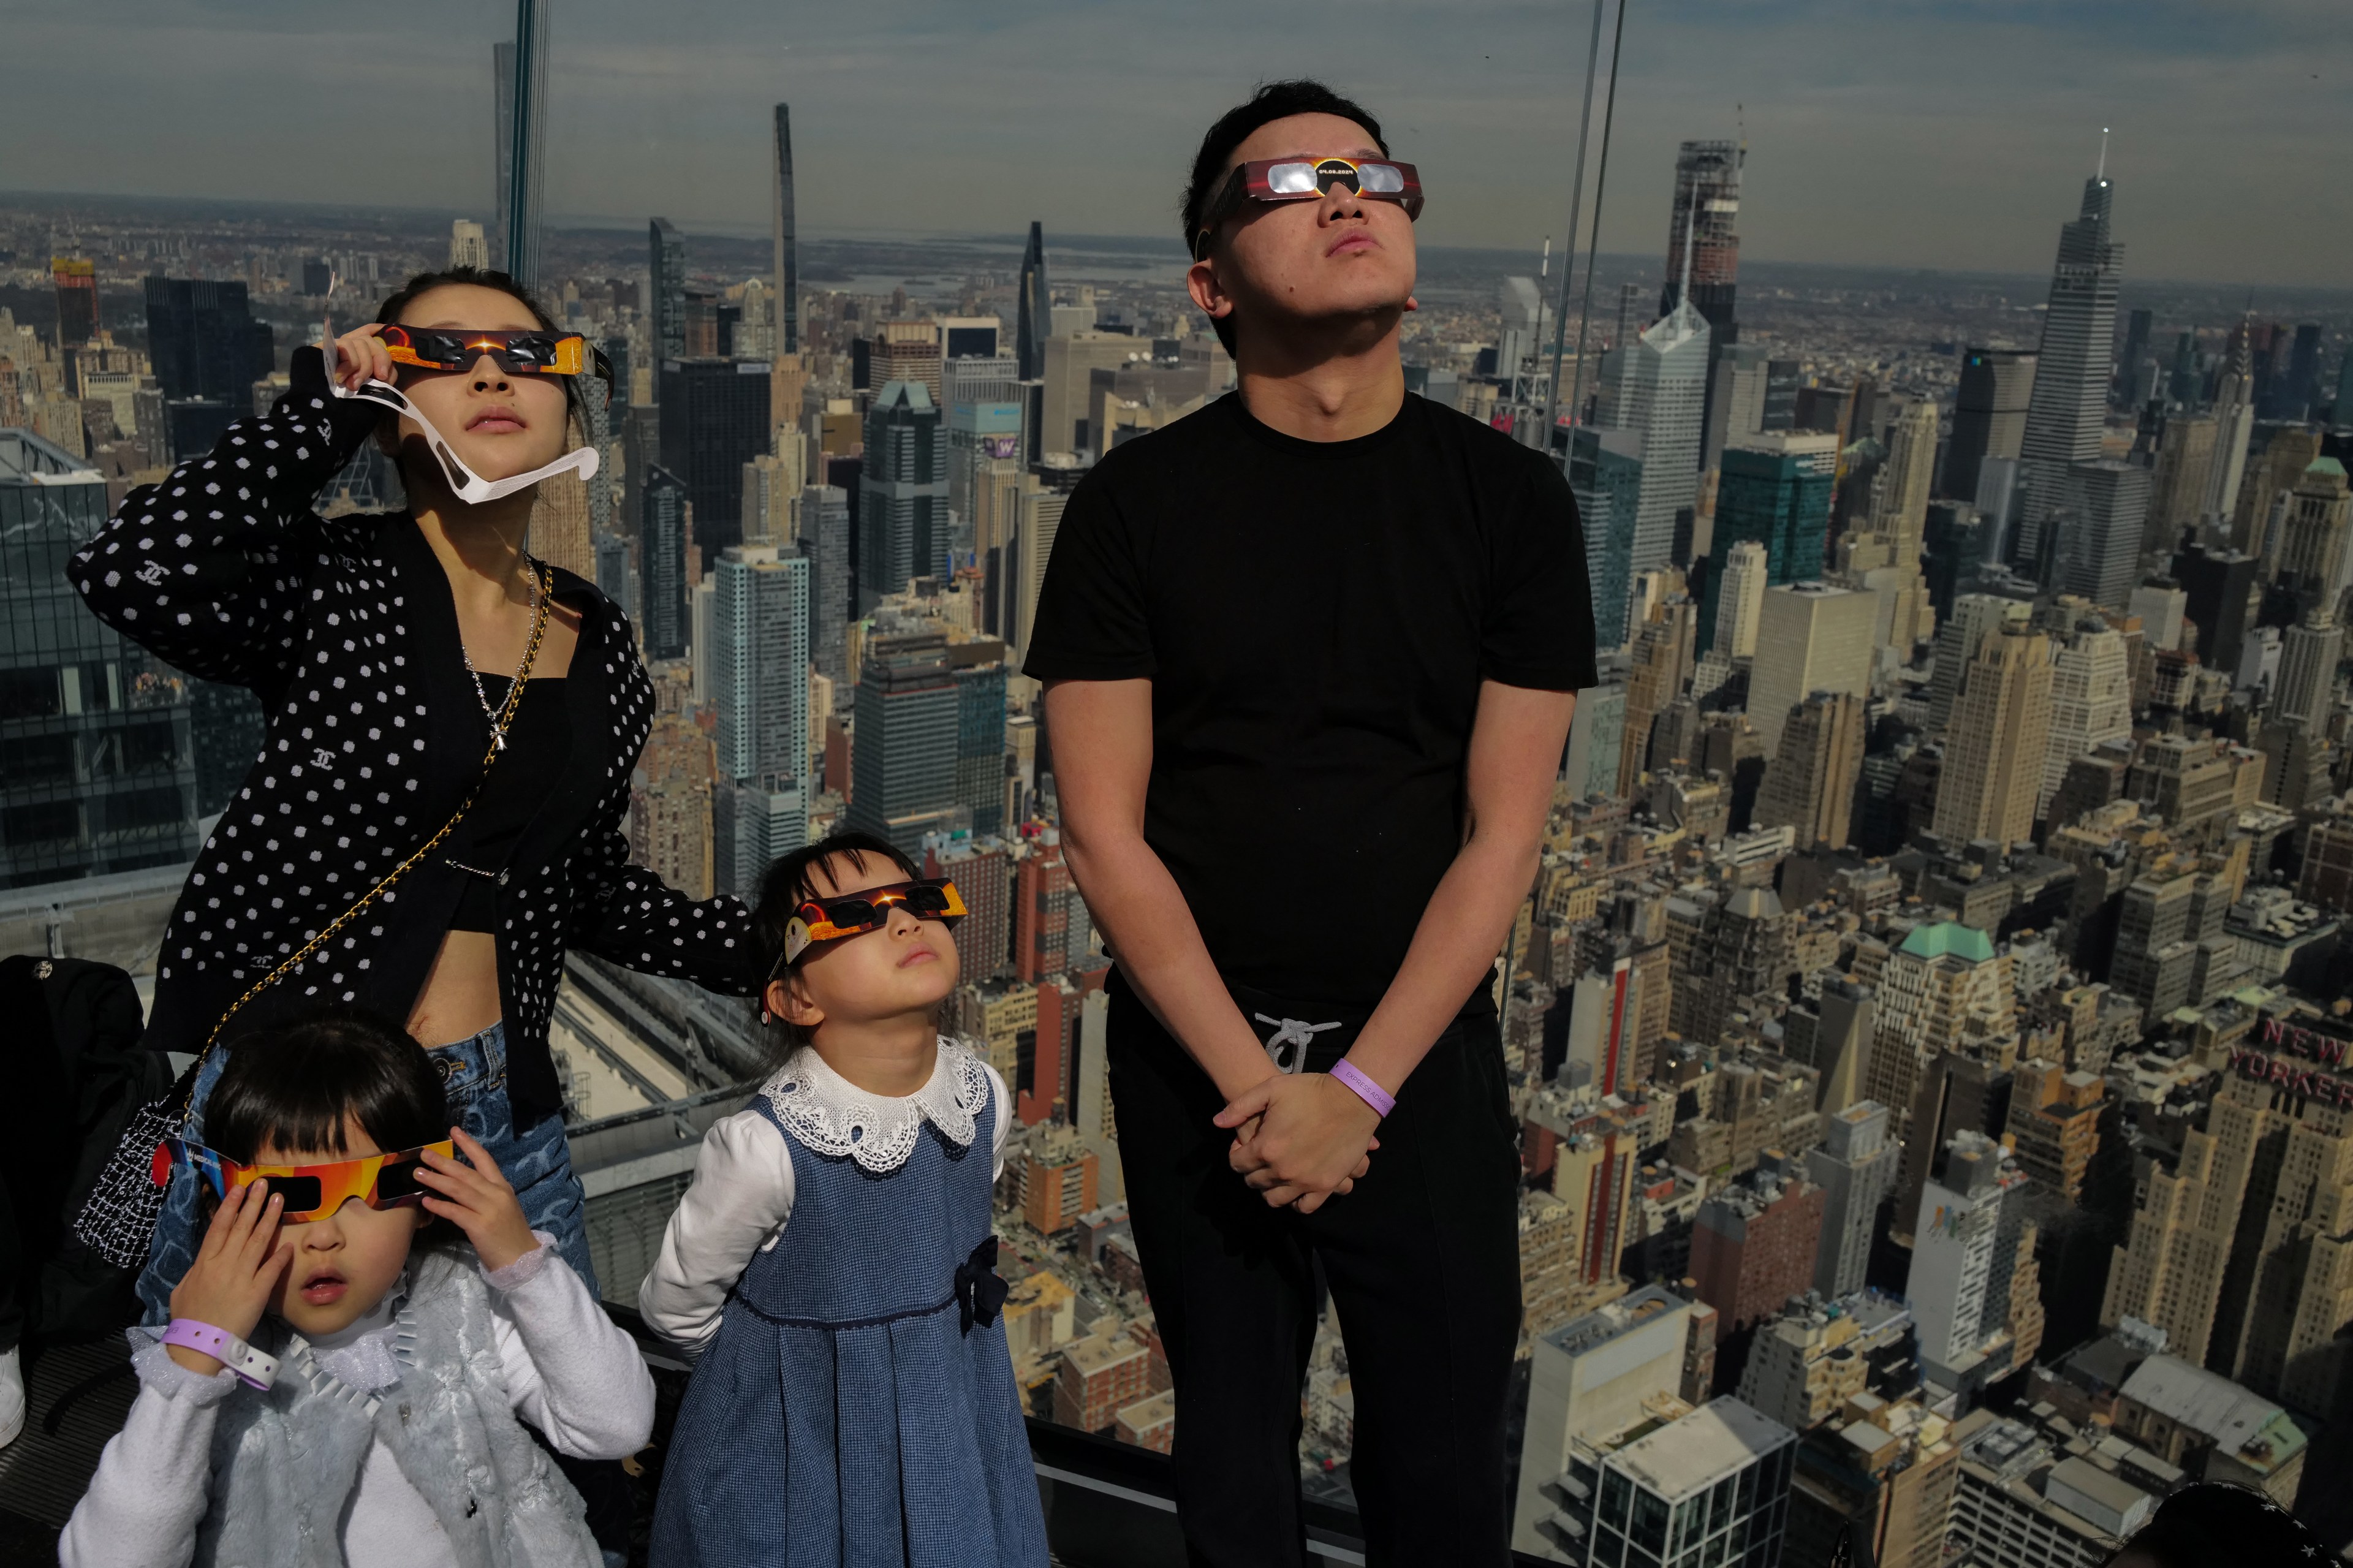 A family of four wearing eclipse glasses stands high above a cityscape, seemingly observing a celestial event.